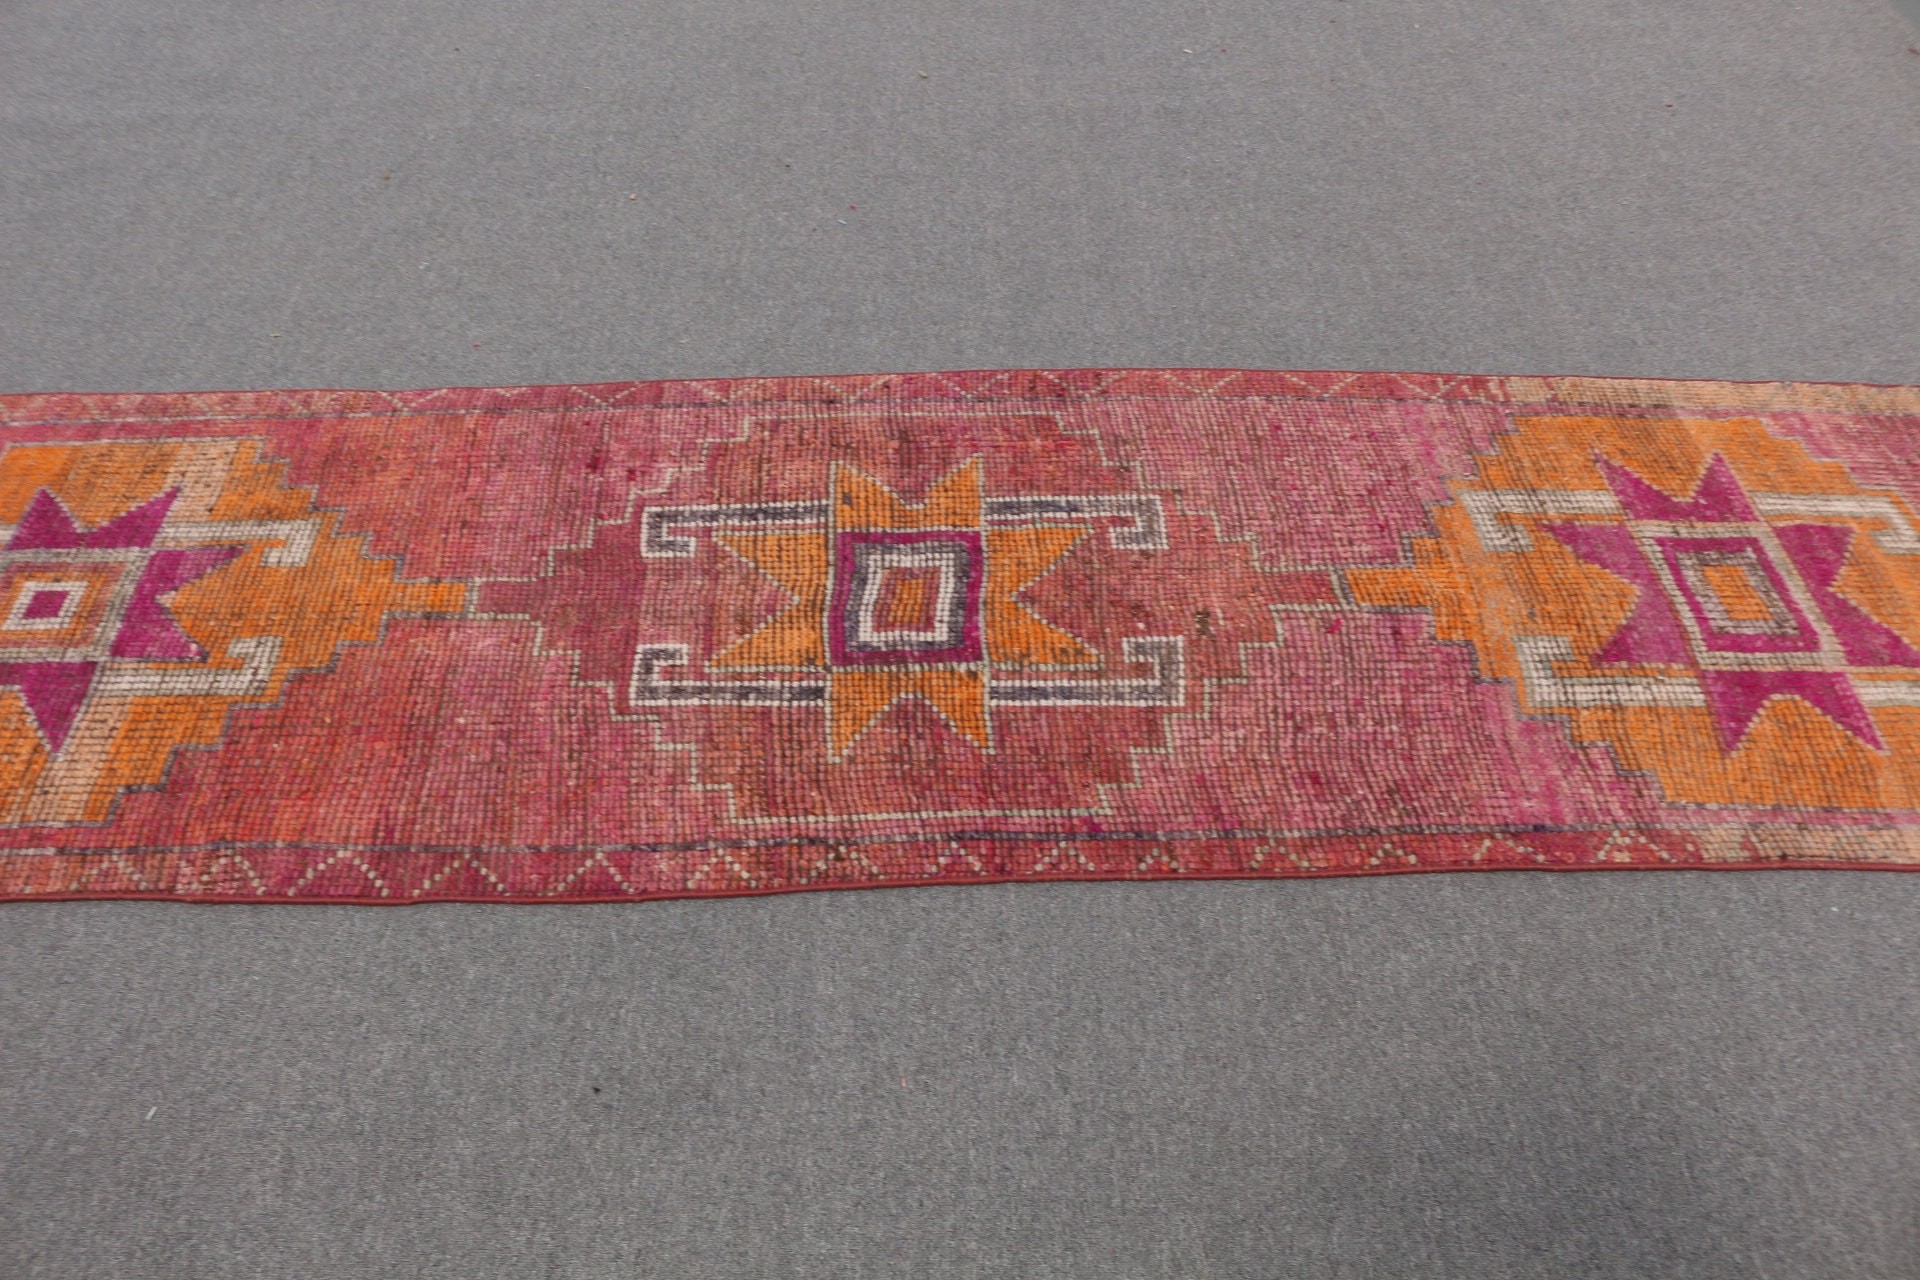 2.8x10.5 ft Runner Rug, Turkish Rugs, Stair Rugs, Vintage Rug, Cool Rugs, Antique Rug, Orange Anatolian Rug, Rugs for Kitchen, Kitchen Rug